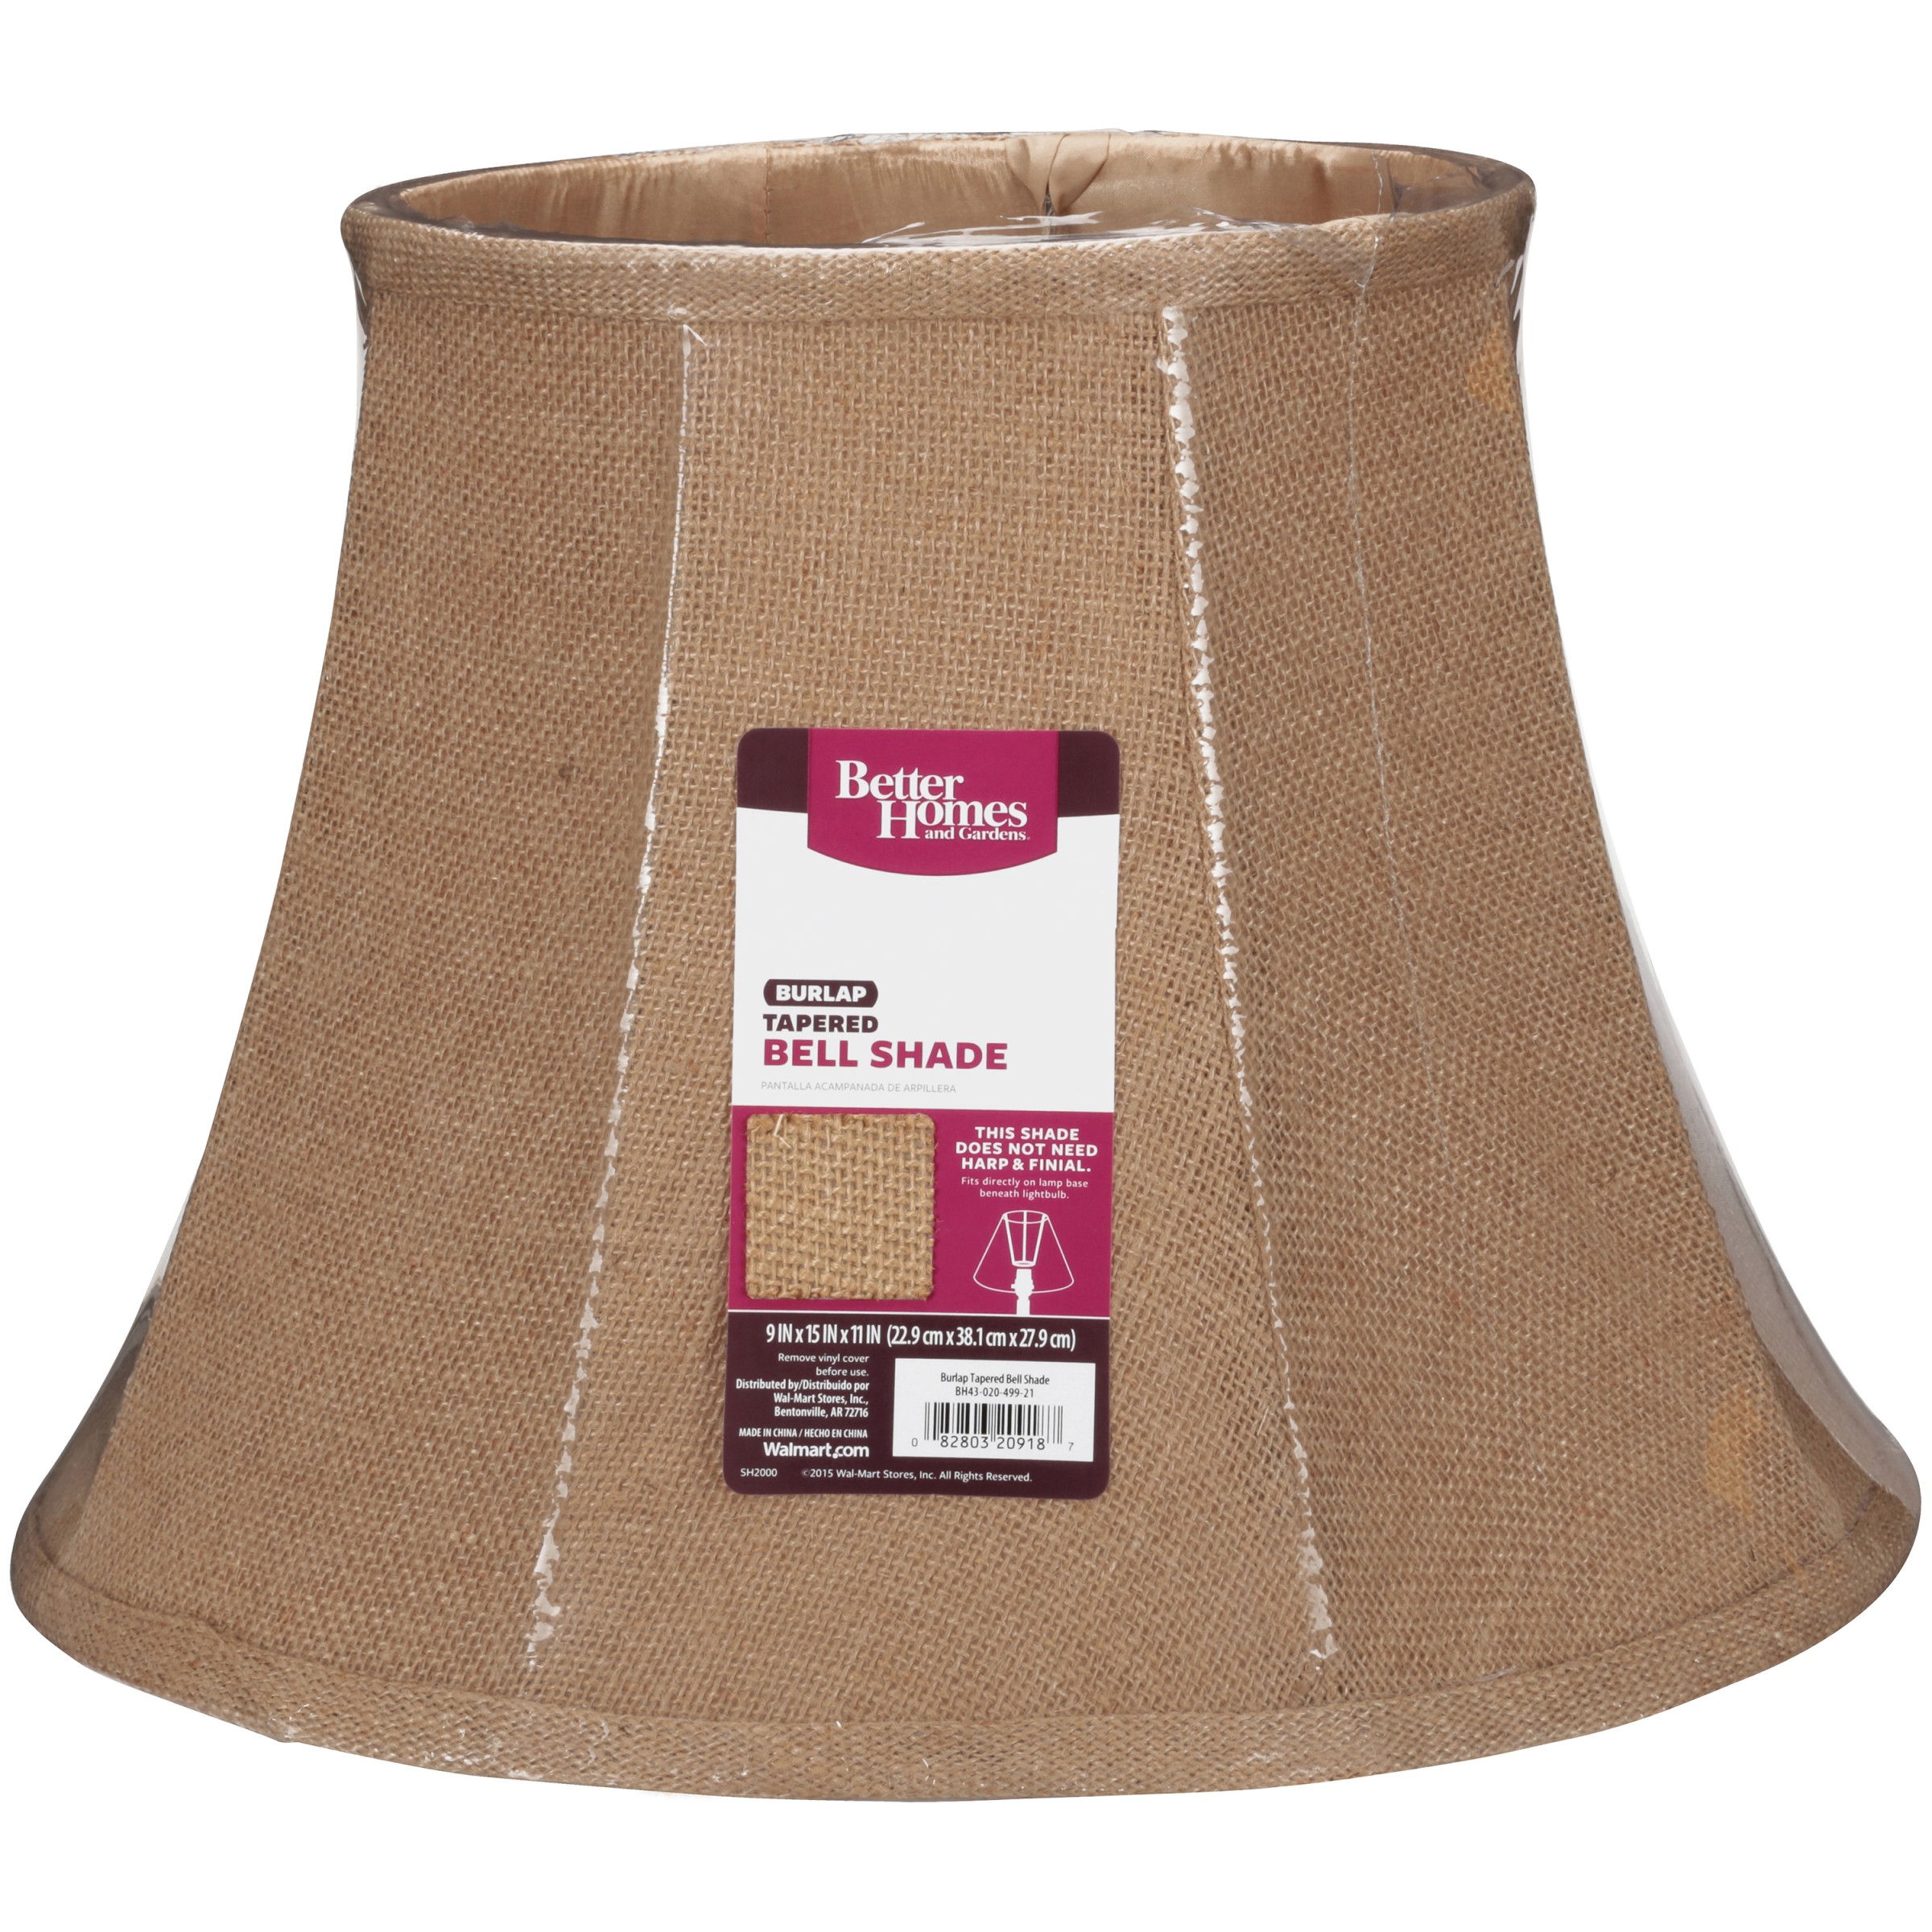 Better Homes and Gardens Burlap Tapered Bell Shade - image 2 of 3